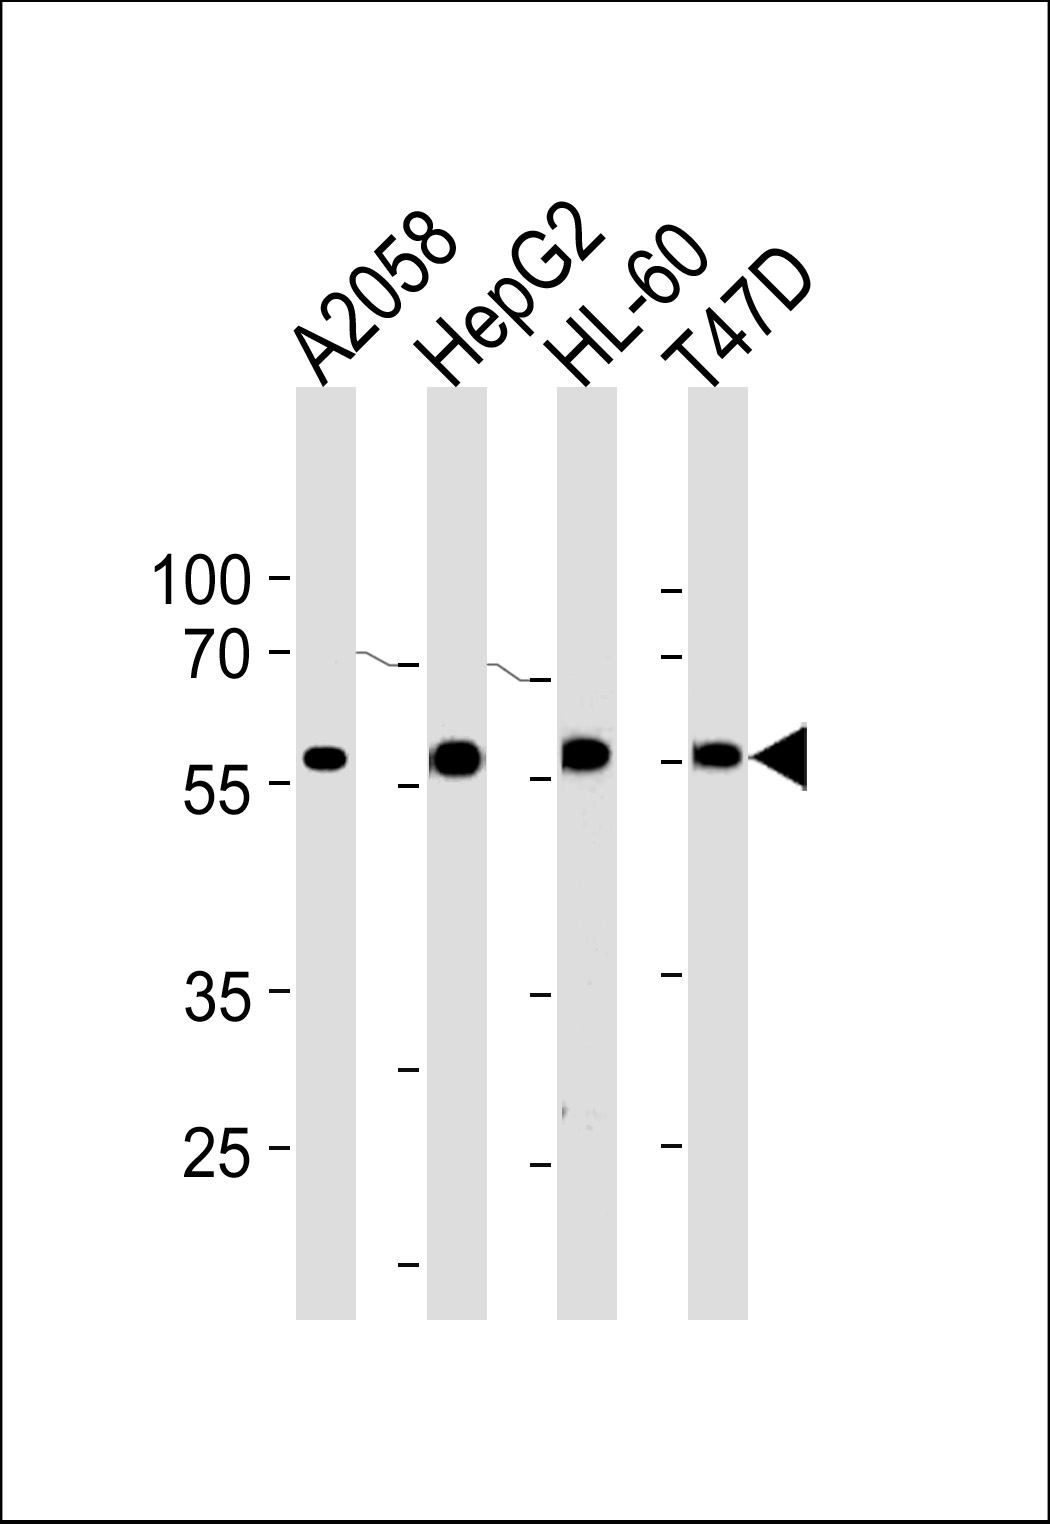 GRN Antibody (C-term) (Cat. #AP20450b) western blot analysis in A2058,HepG2,HL-60,T47D cell line lysates (35ug/lane).This demonstrates the GRN antibody detected the GRN protein (arrow).